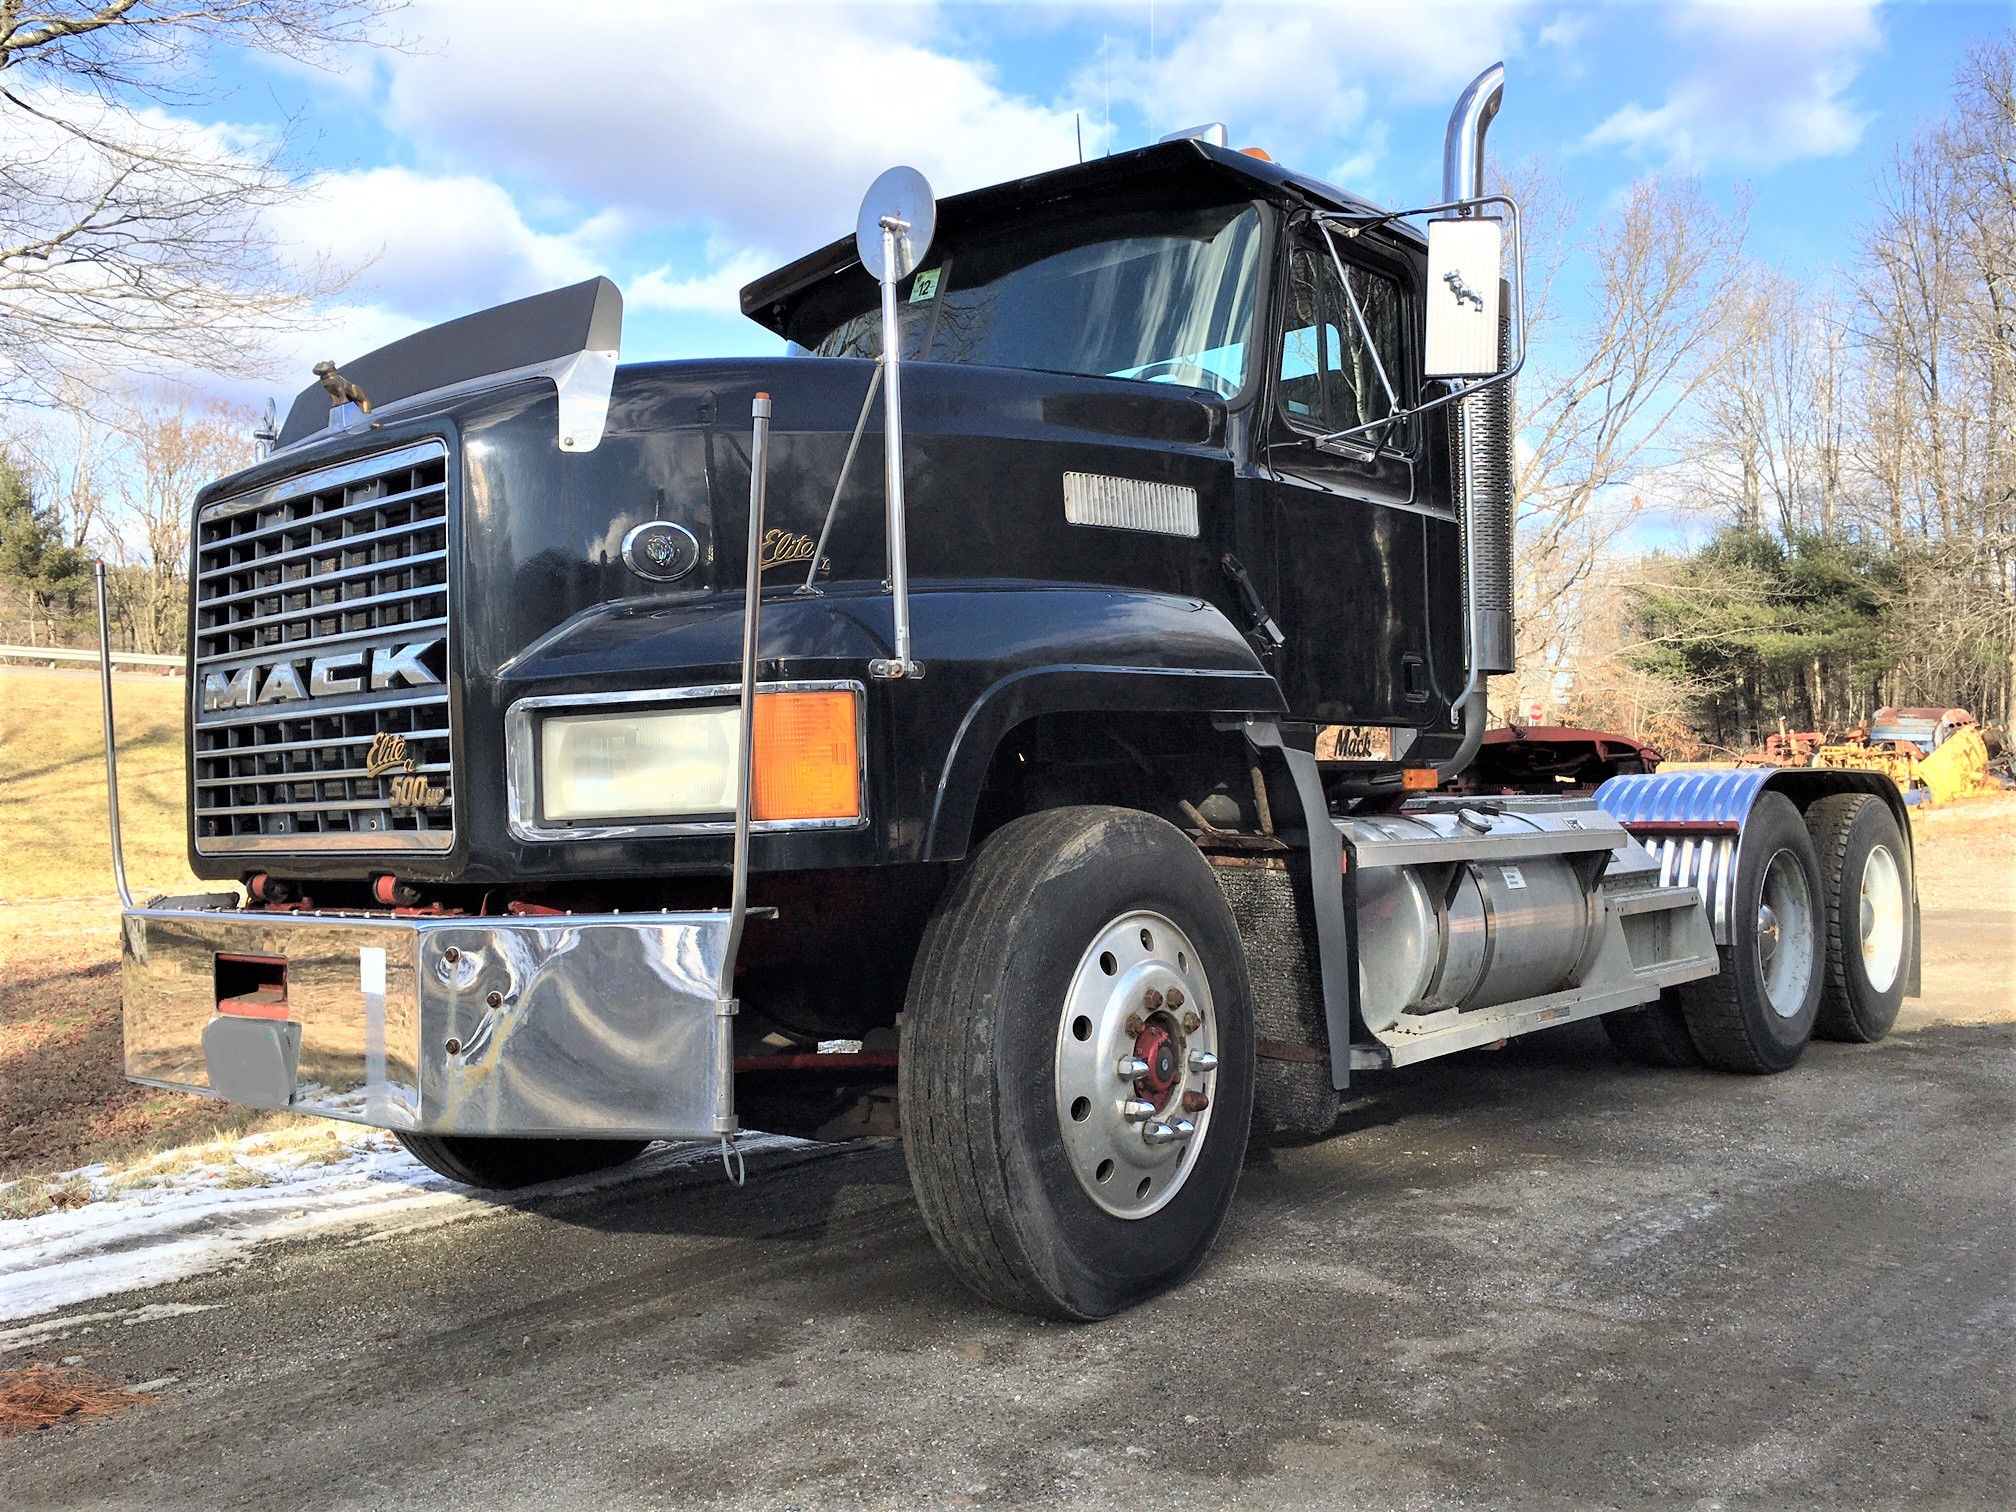 Mack CL713 Semi Tractor. 1999 Mack Elite day cab conventional with a 500 horsepower V8 diesel engine and 463015 miles. Maxitorque extended range 12 speed splitter transmission. Rear axle power divider. 12k front suspension. Hendrickson air ride rear suspension with 44k lbs. rears and 4.42 ratio.  187" inch wheelbase. Double frame. PTO and Wetline set up. Engine break. Air ride drivers seat. Heat and A/C.